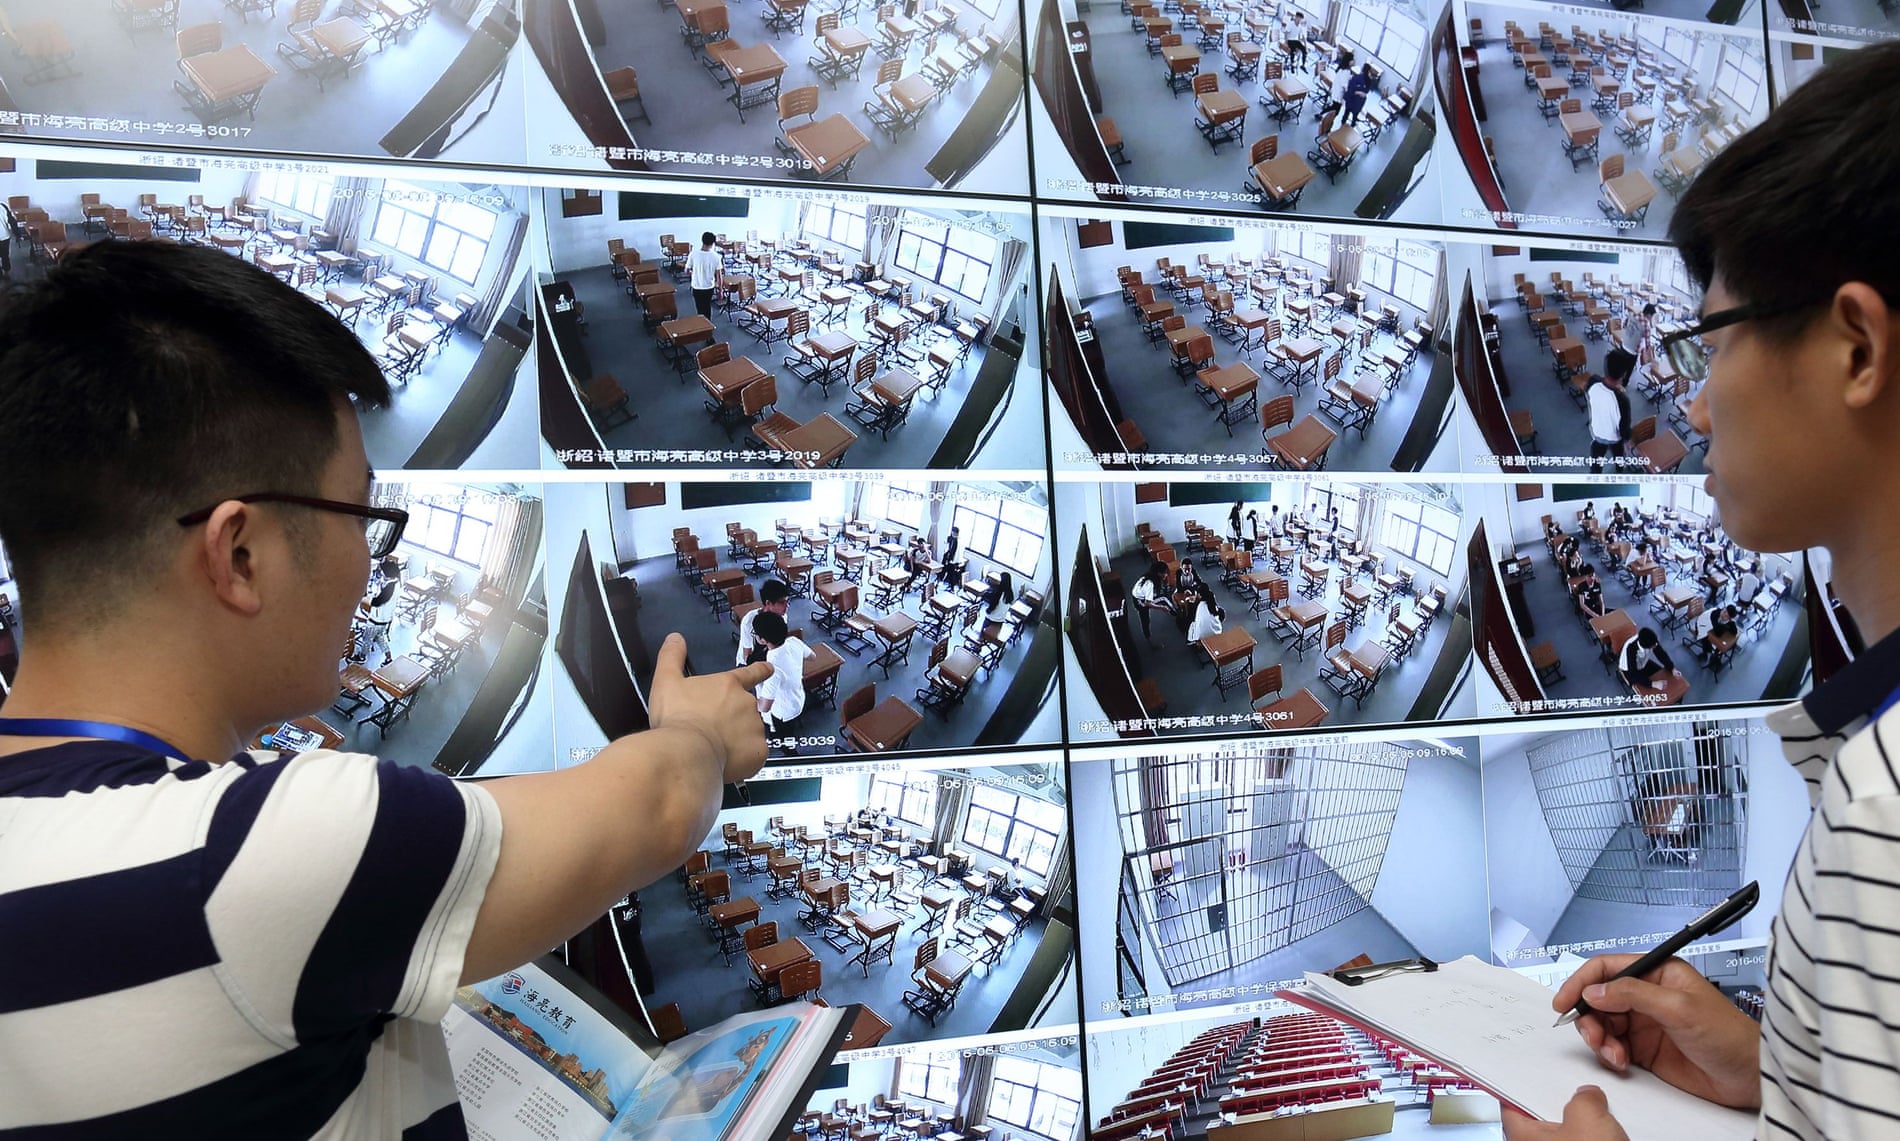 Invigilators use CCTV to inspect a classroom before the start of an exam at a school in Zhuji city, east China’s Zhejiang province.